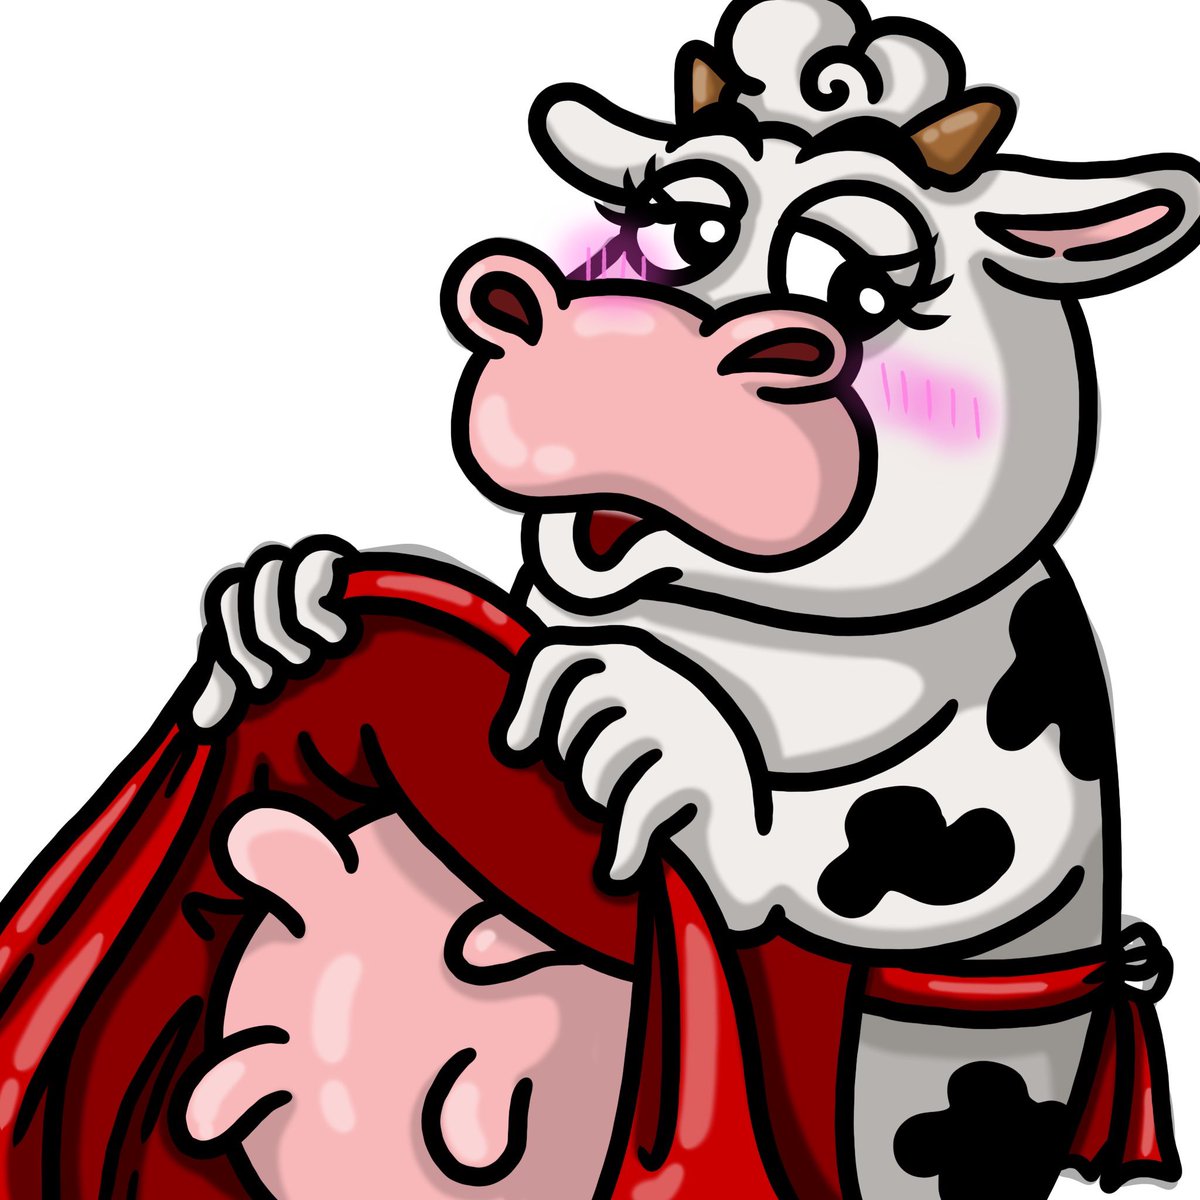 Official meme contest! Top 3 best memes with our mascot $MILK will each receive a $100 airdrop in $MILK … Are you ready? Go. 🐮